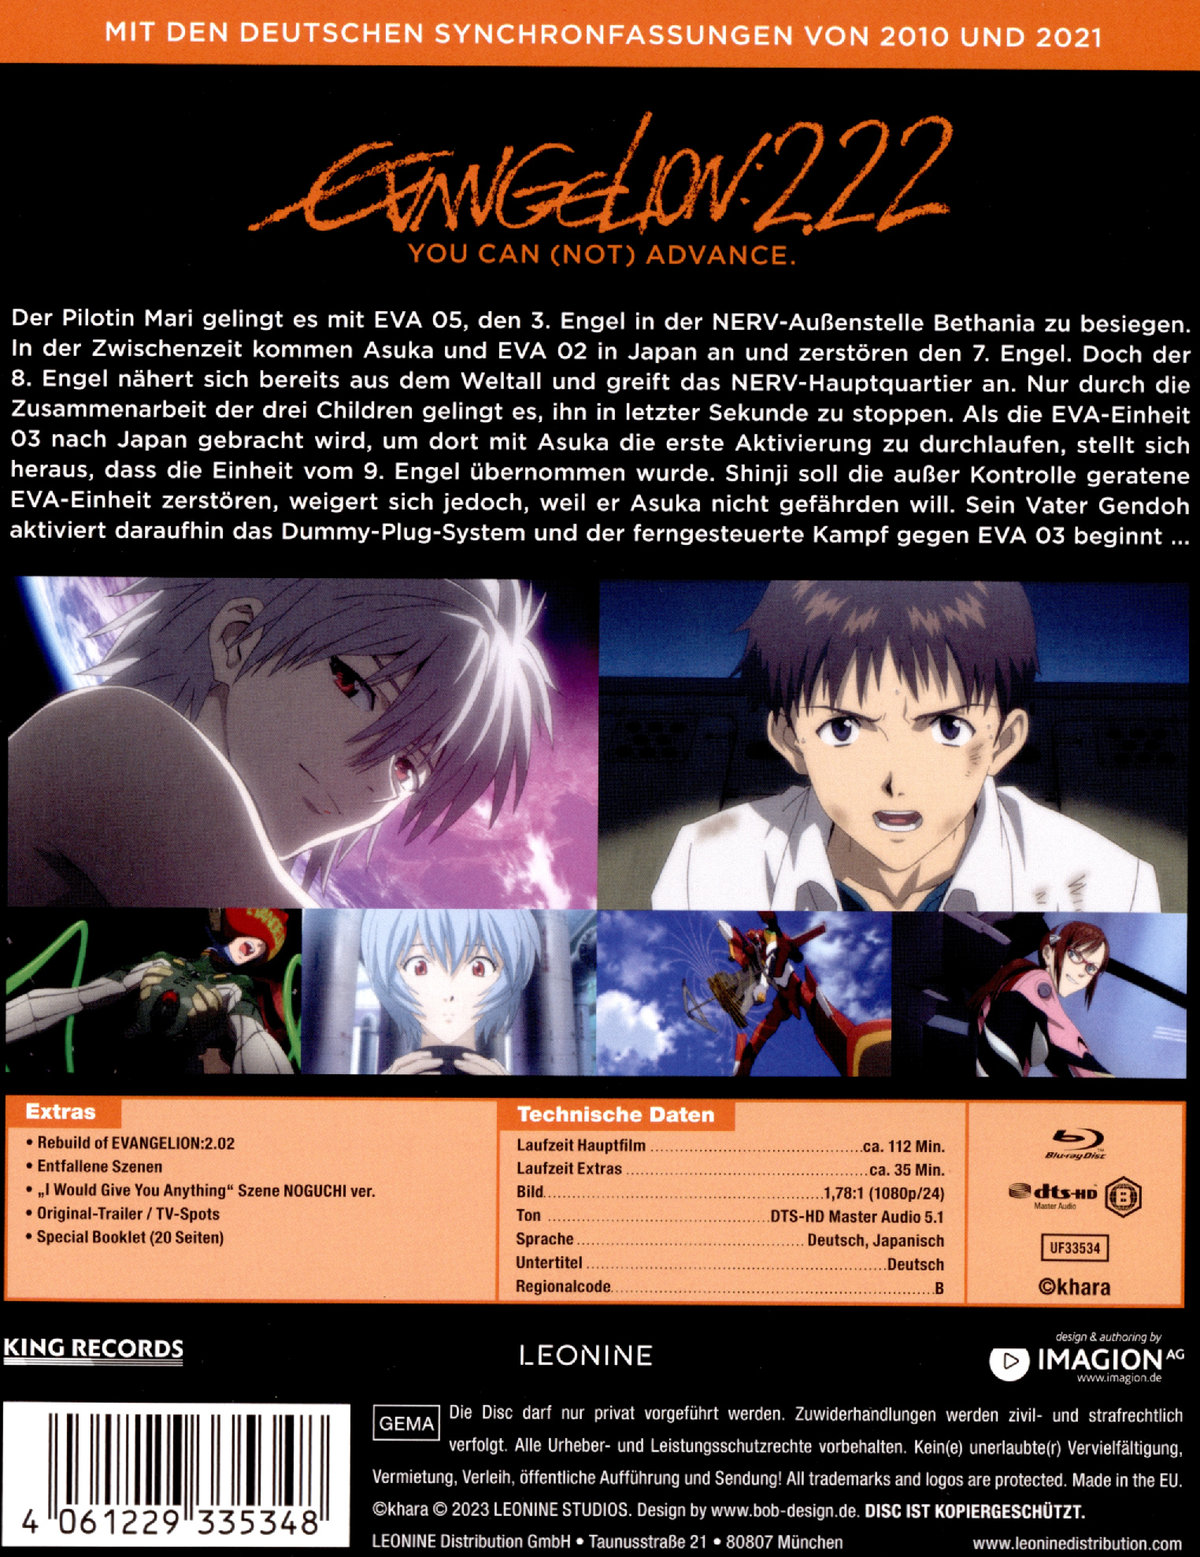 Evangelion: 2.22 - You can (not) advance.- Uncut Mediabook Edition (blu-ray)